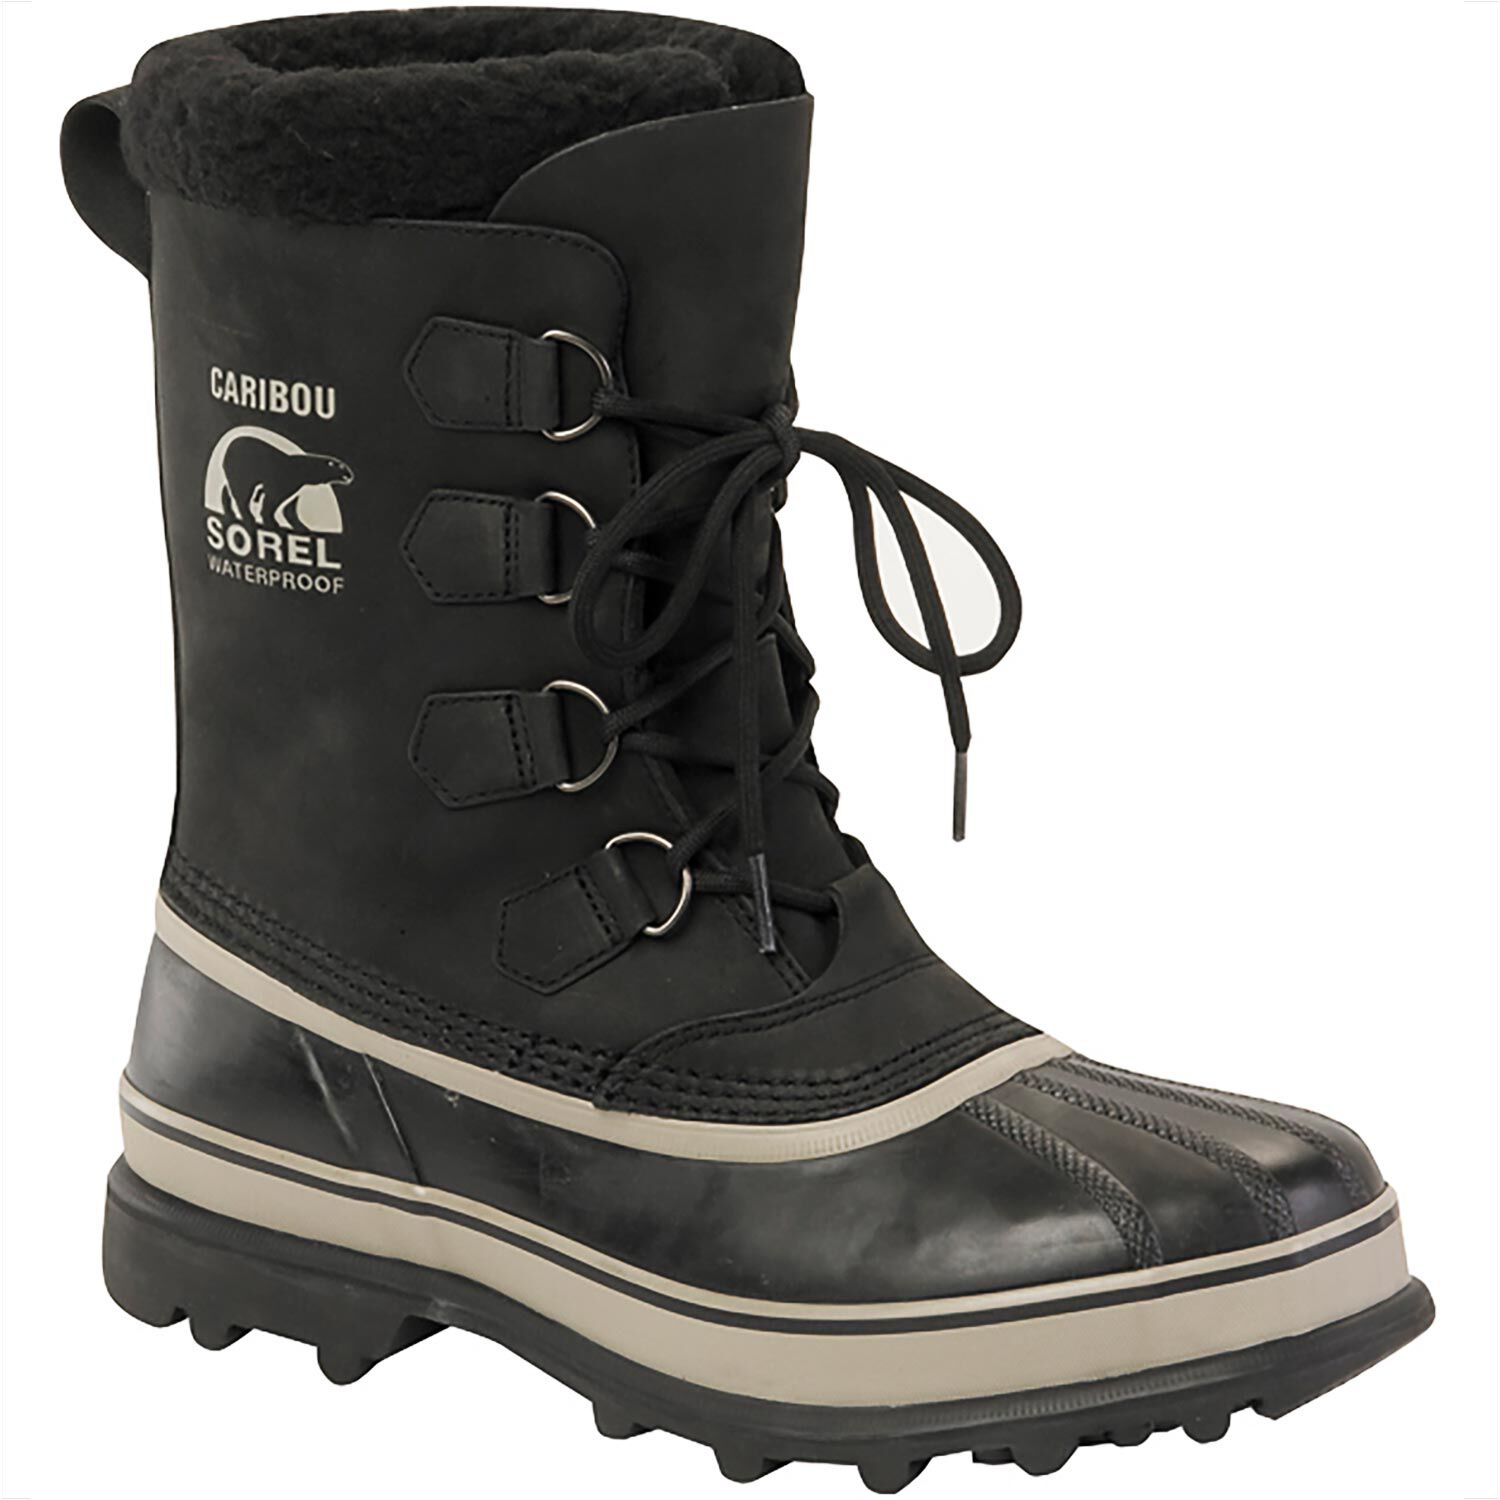 Men's Sorel Winter Boots | Duluth Trading Company